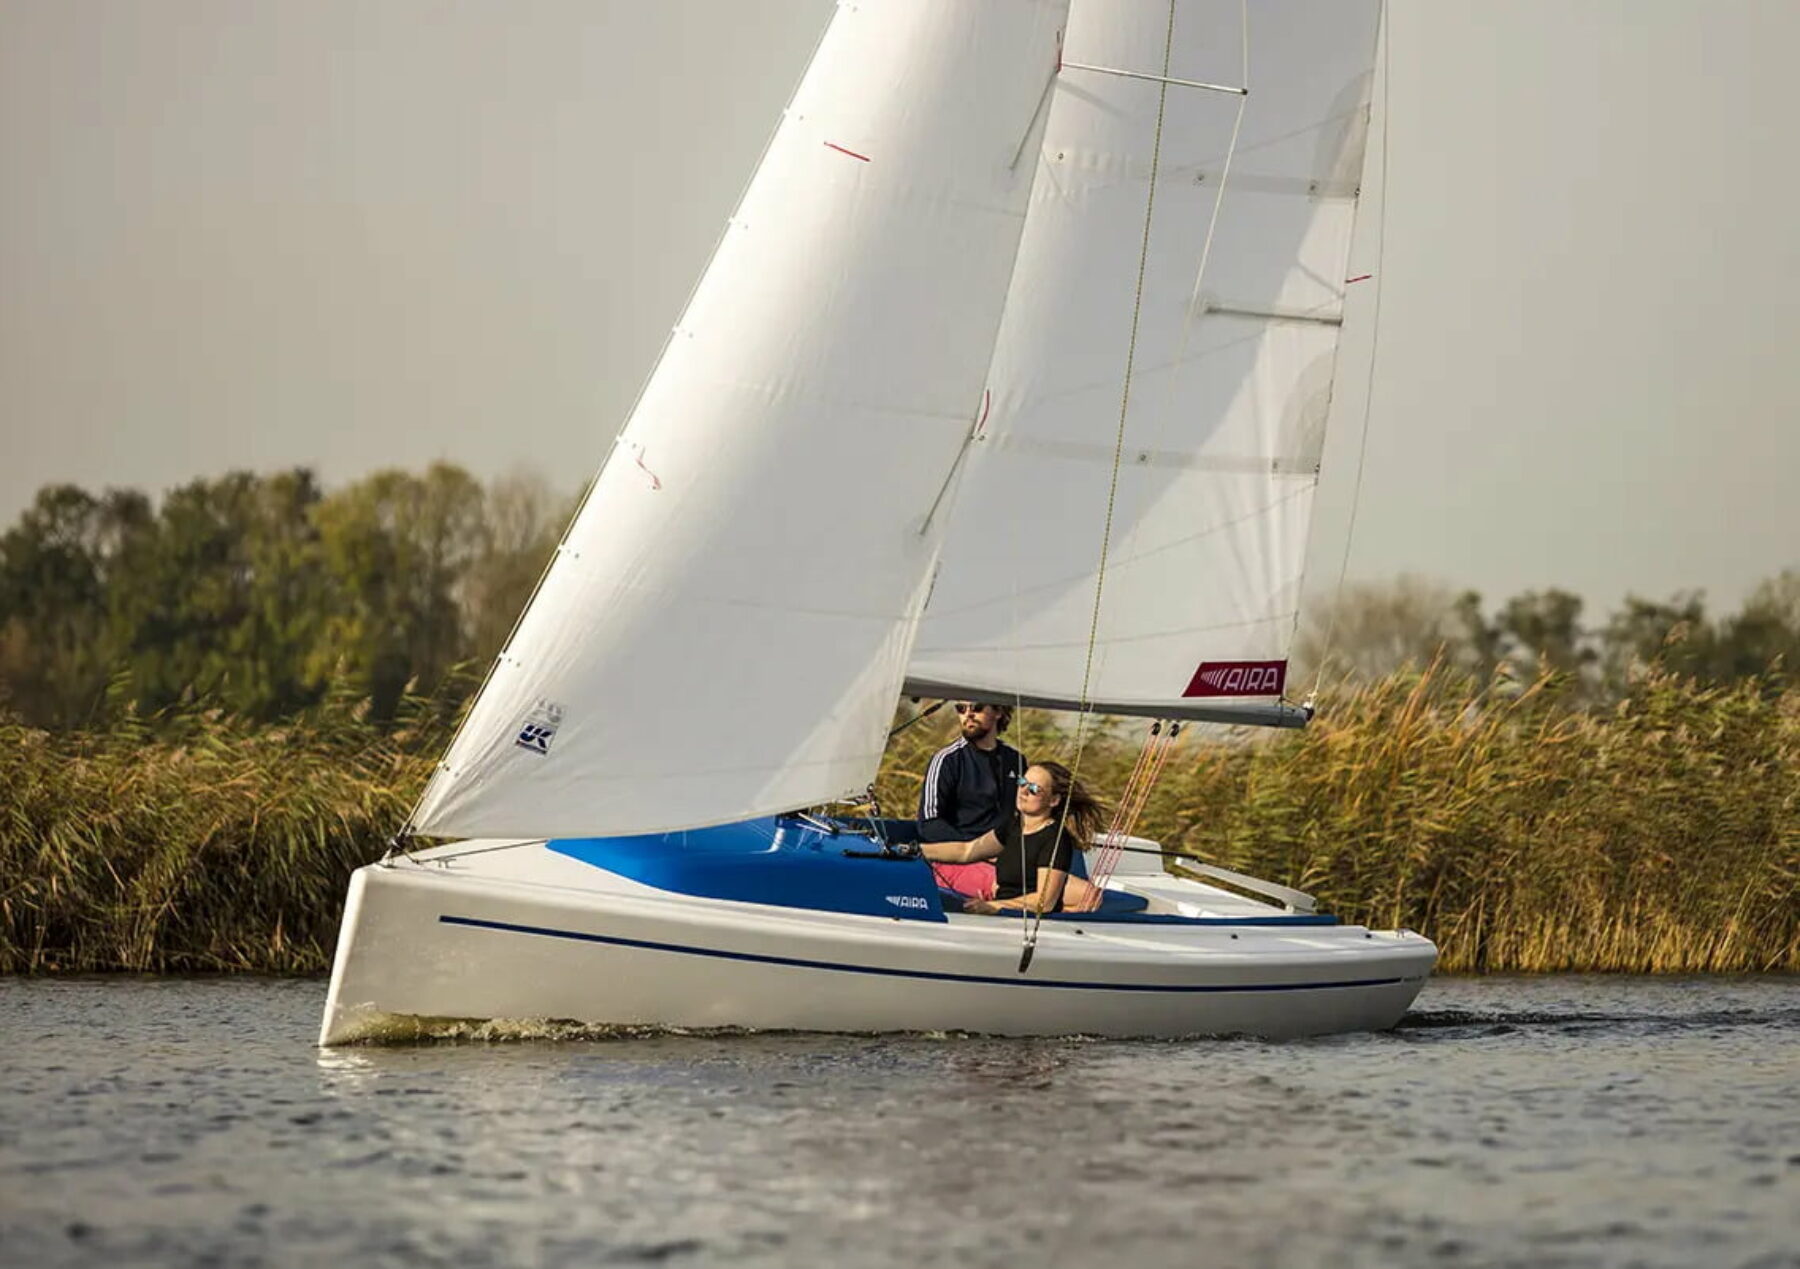 Review: ‘This clever new Dutch Boat’ — Yachting World